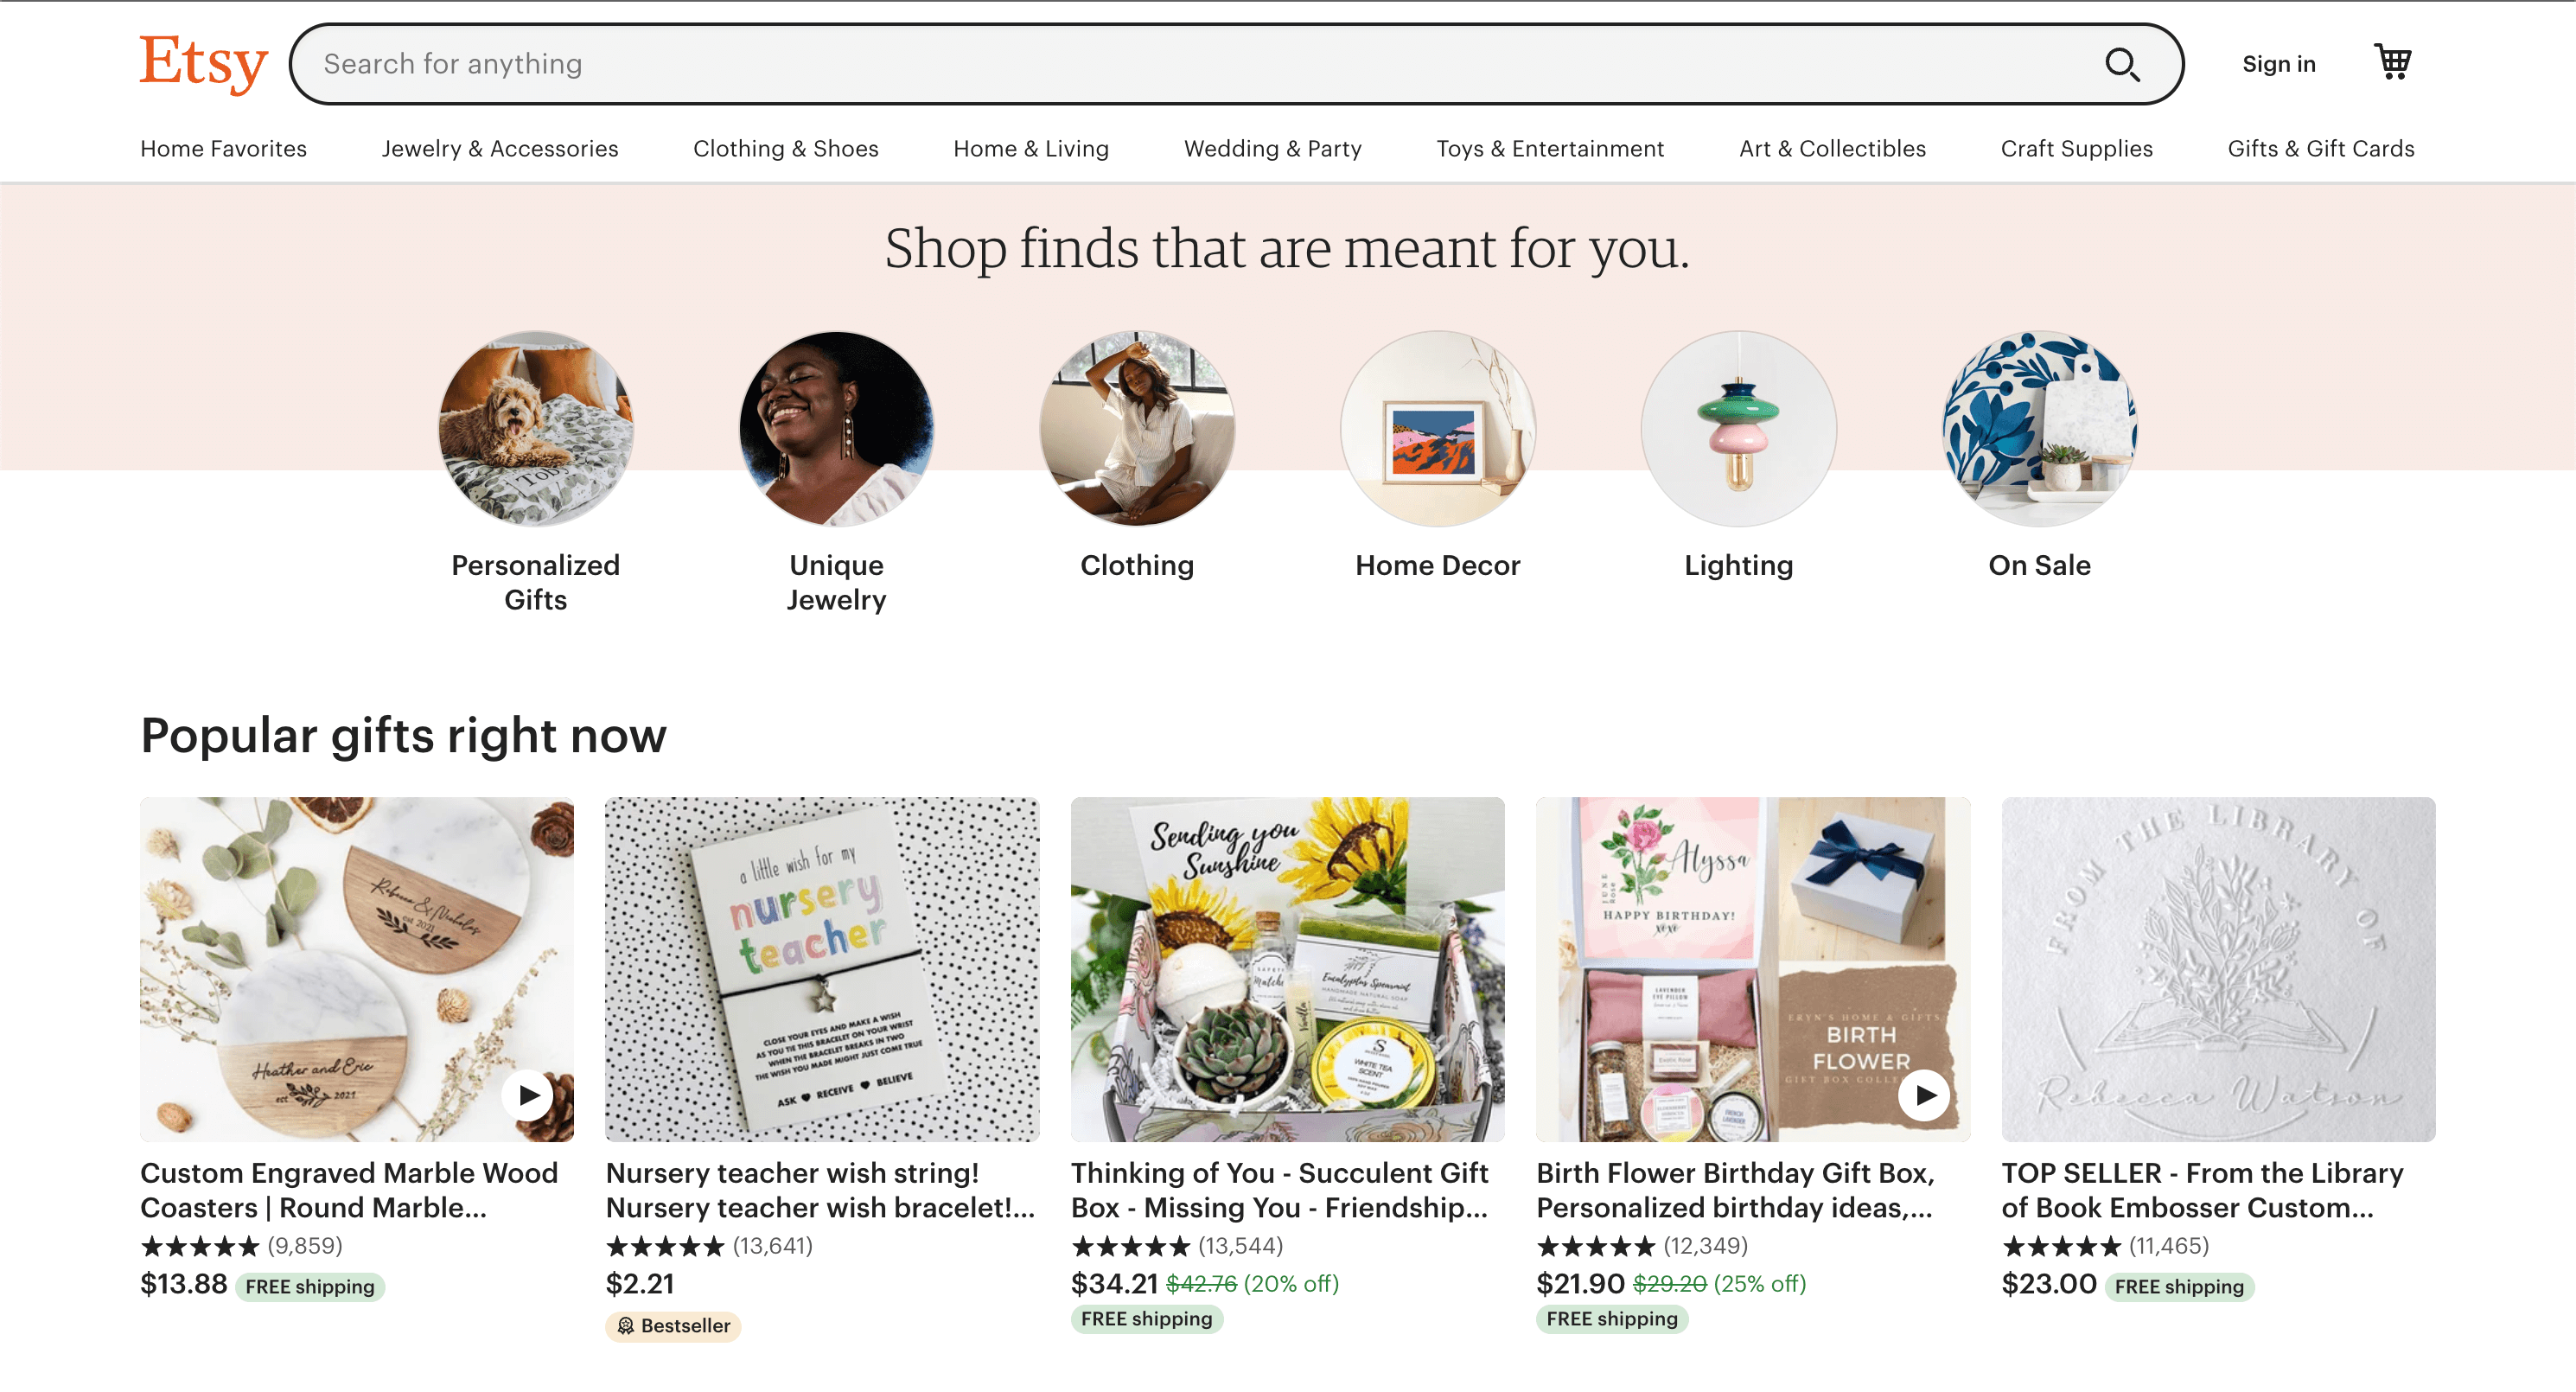 Etsy's home page